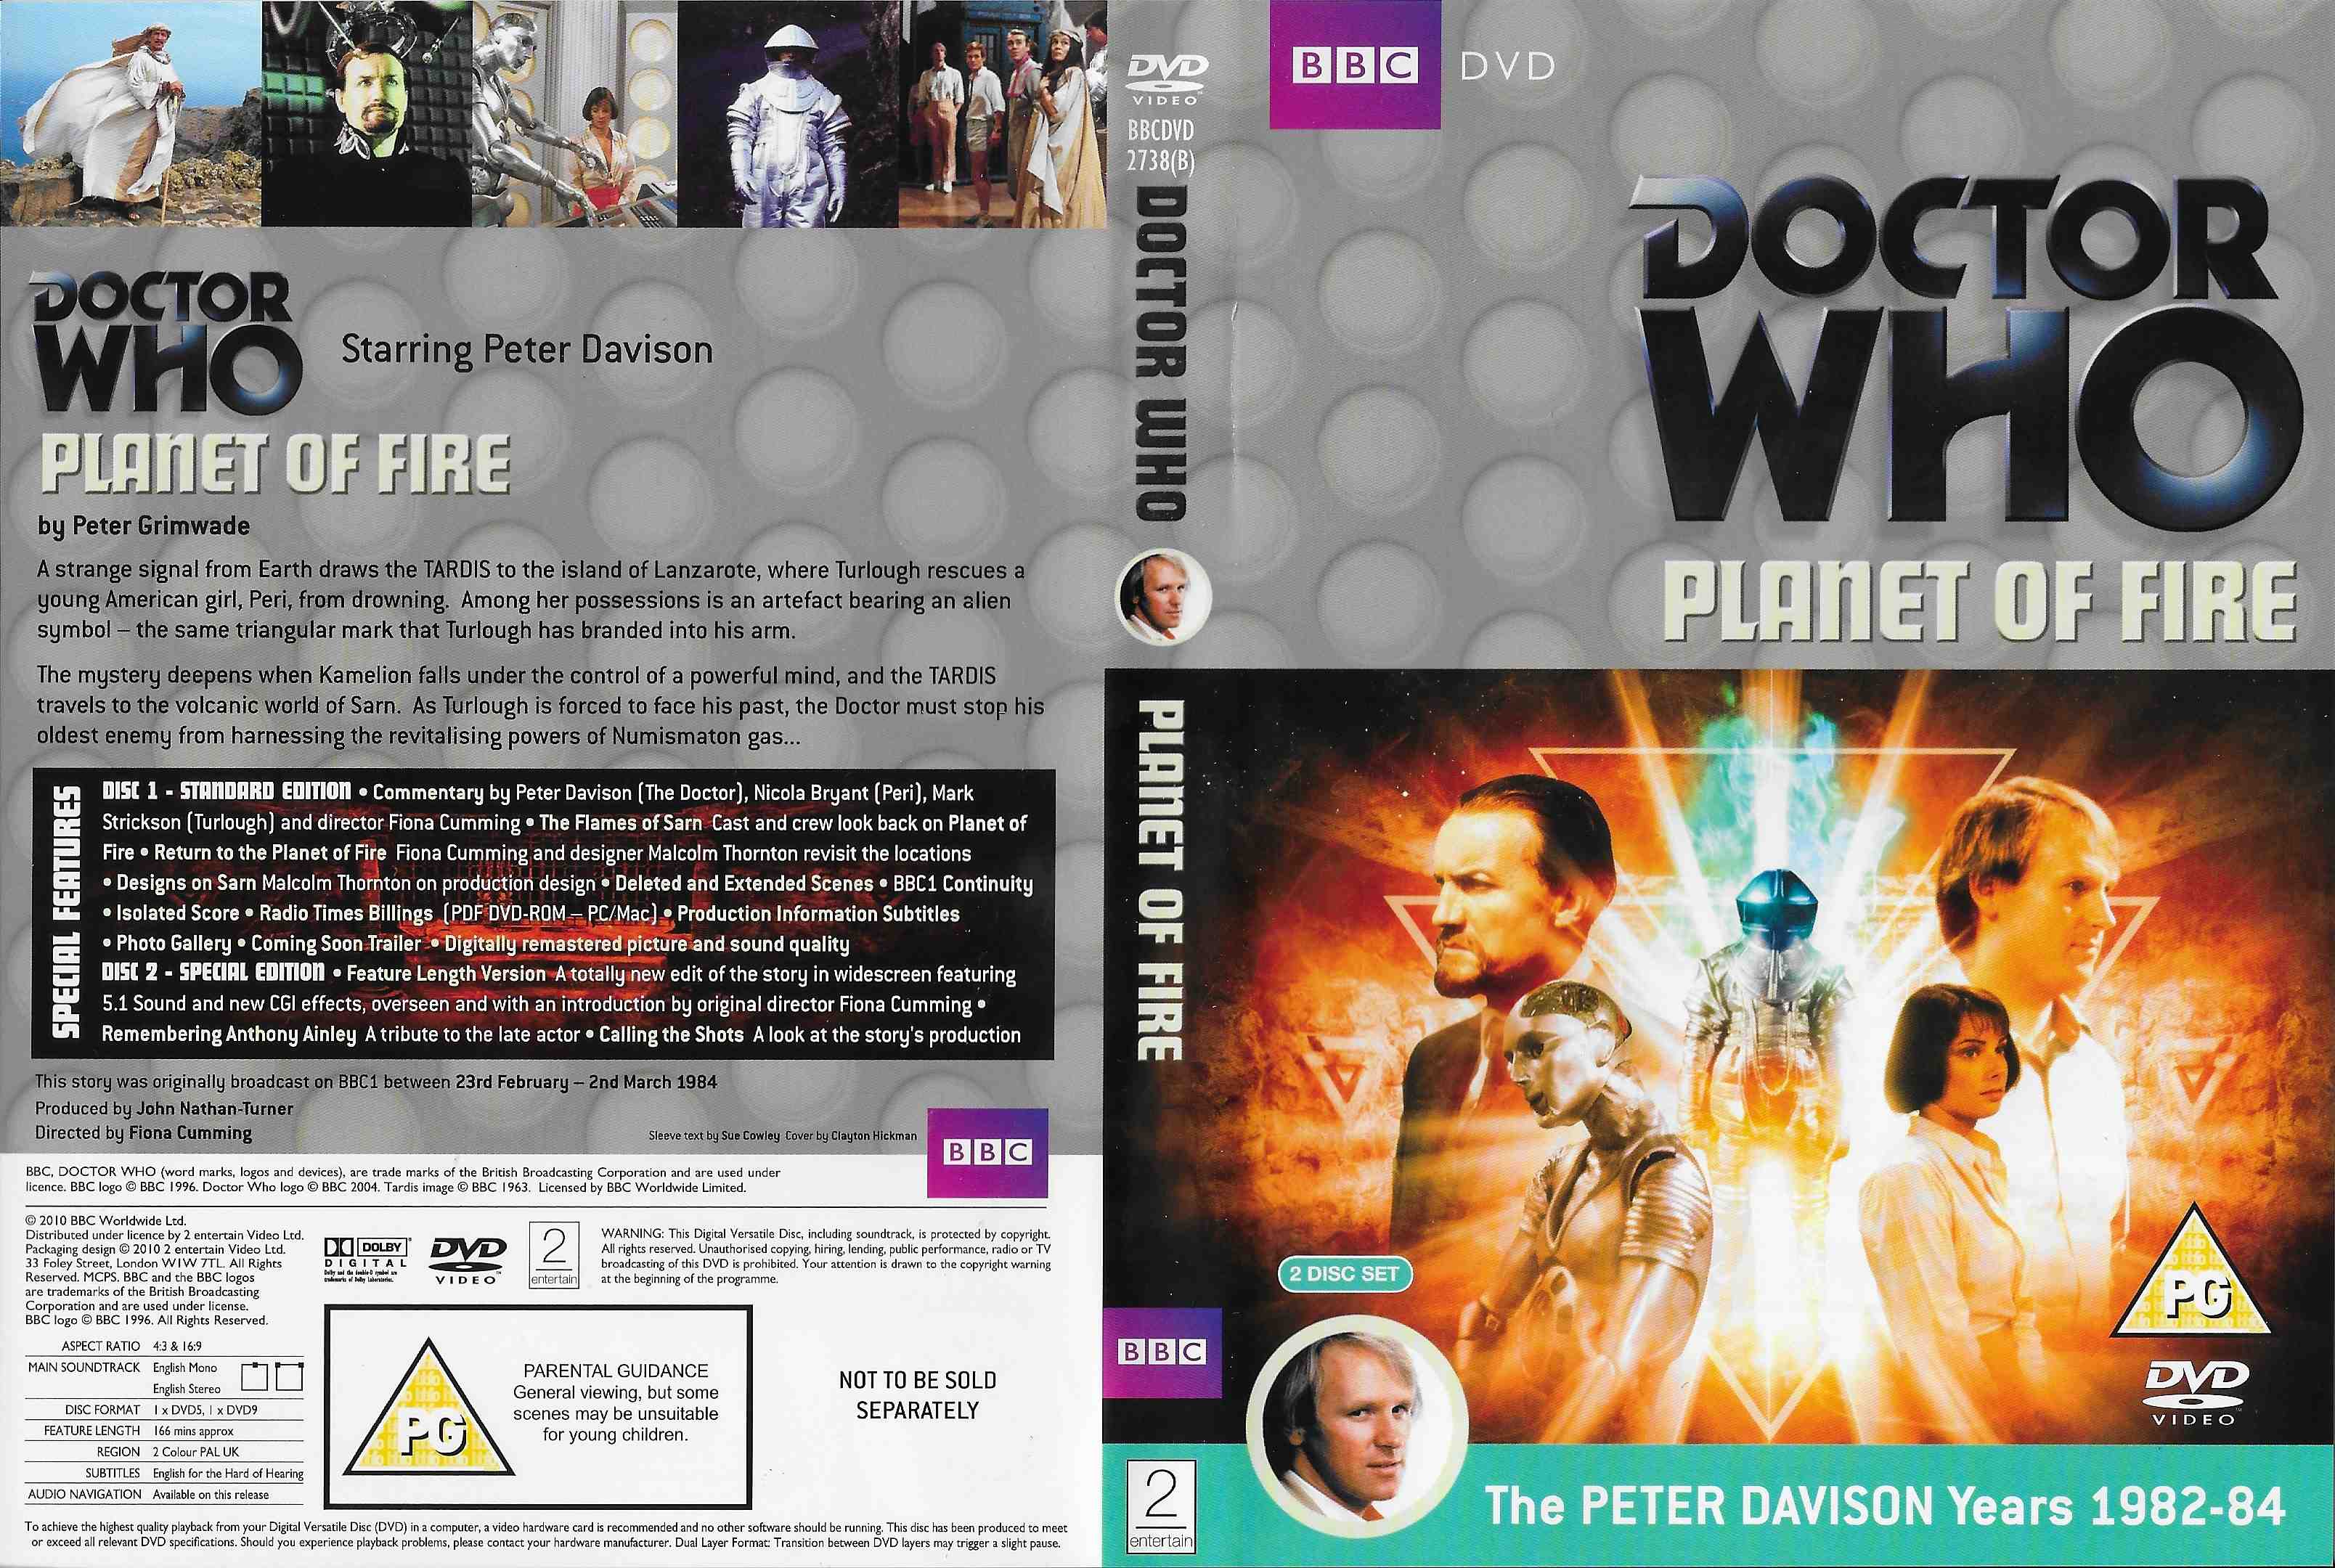 Picture of BBCDVD 2738B Doctor Who - Planet of fire by artist Robert Holmes from the BBC records and Tapes library